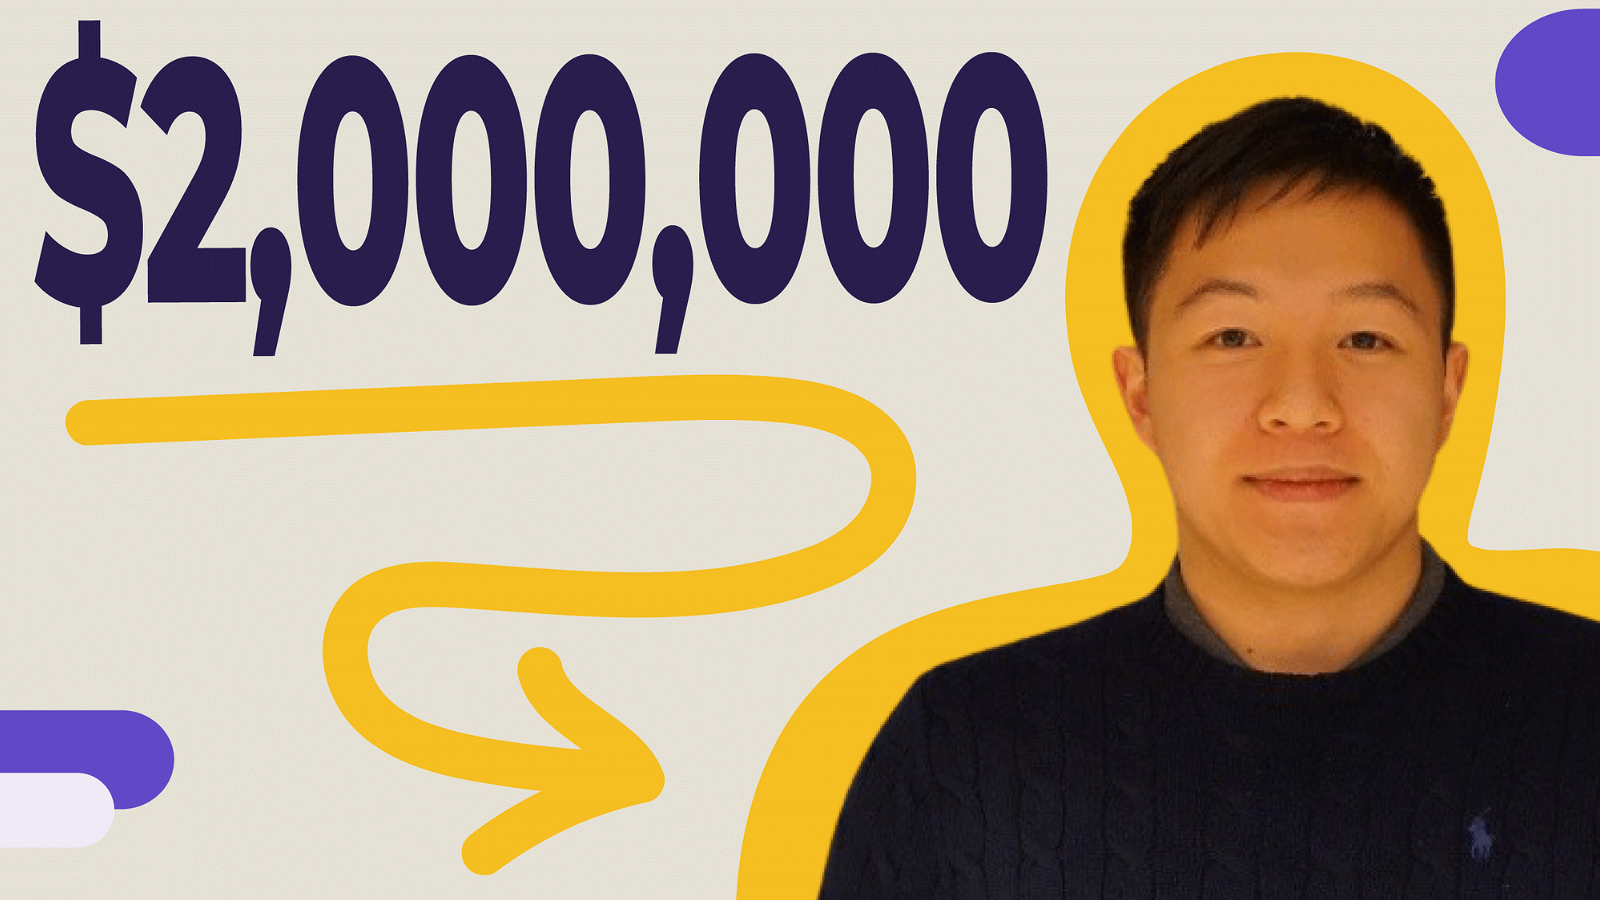 
Acquired by Tencent at 18 years old for $2 million dollars w/ Richard Kong of Gravity Tales